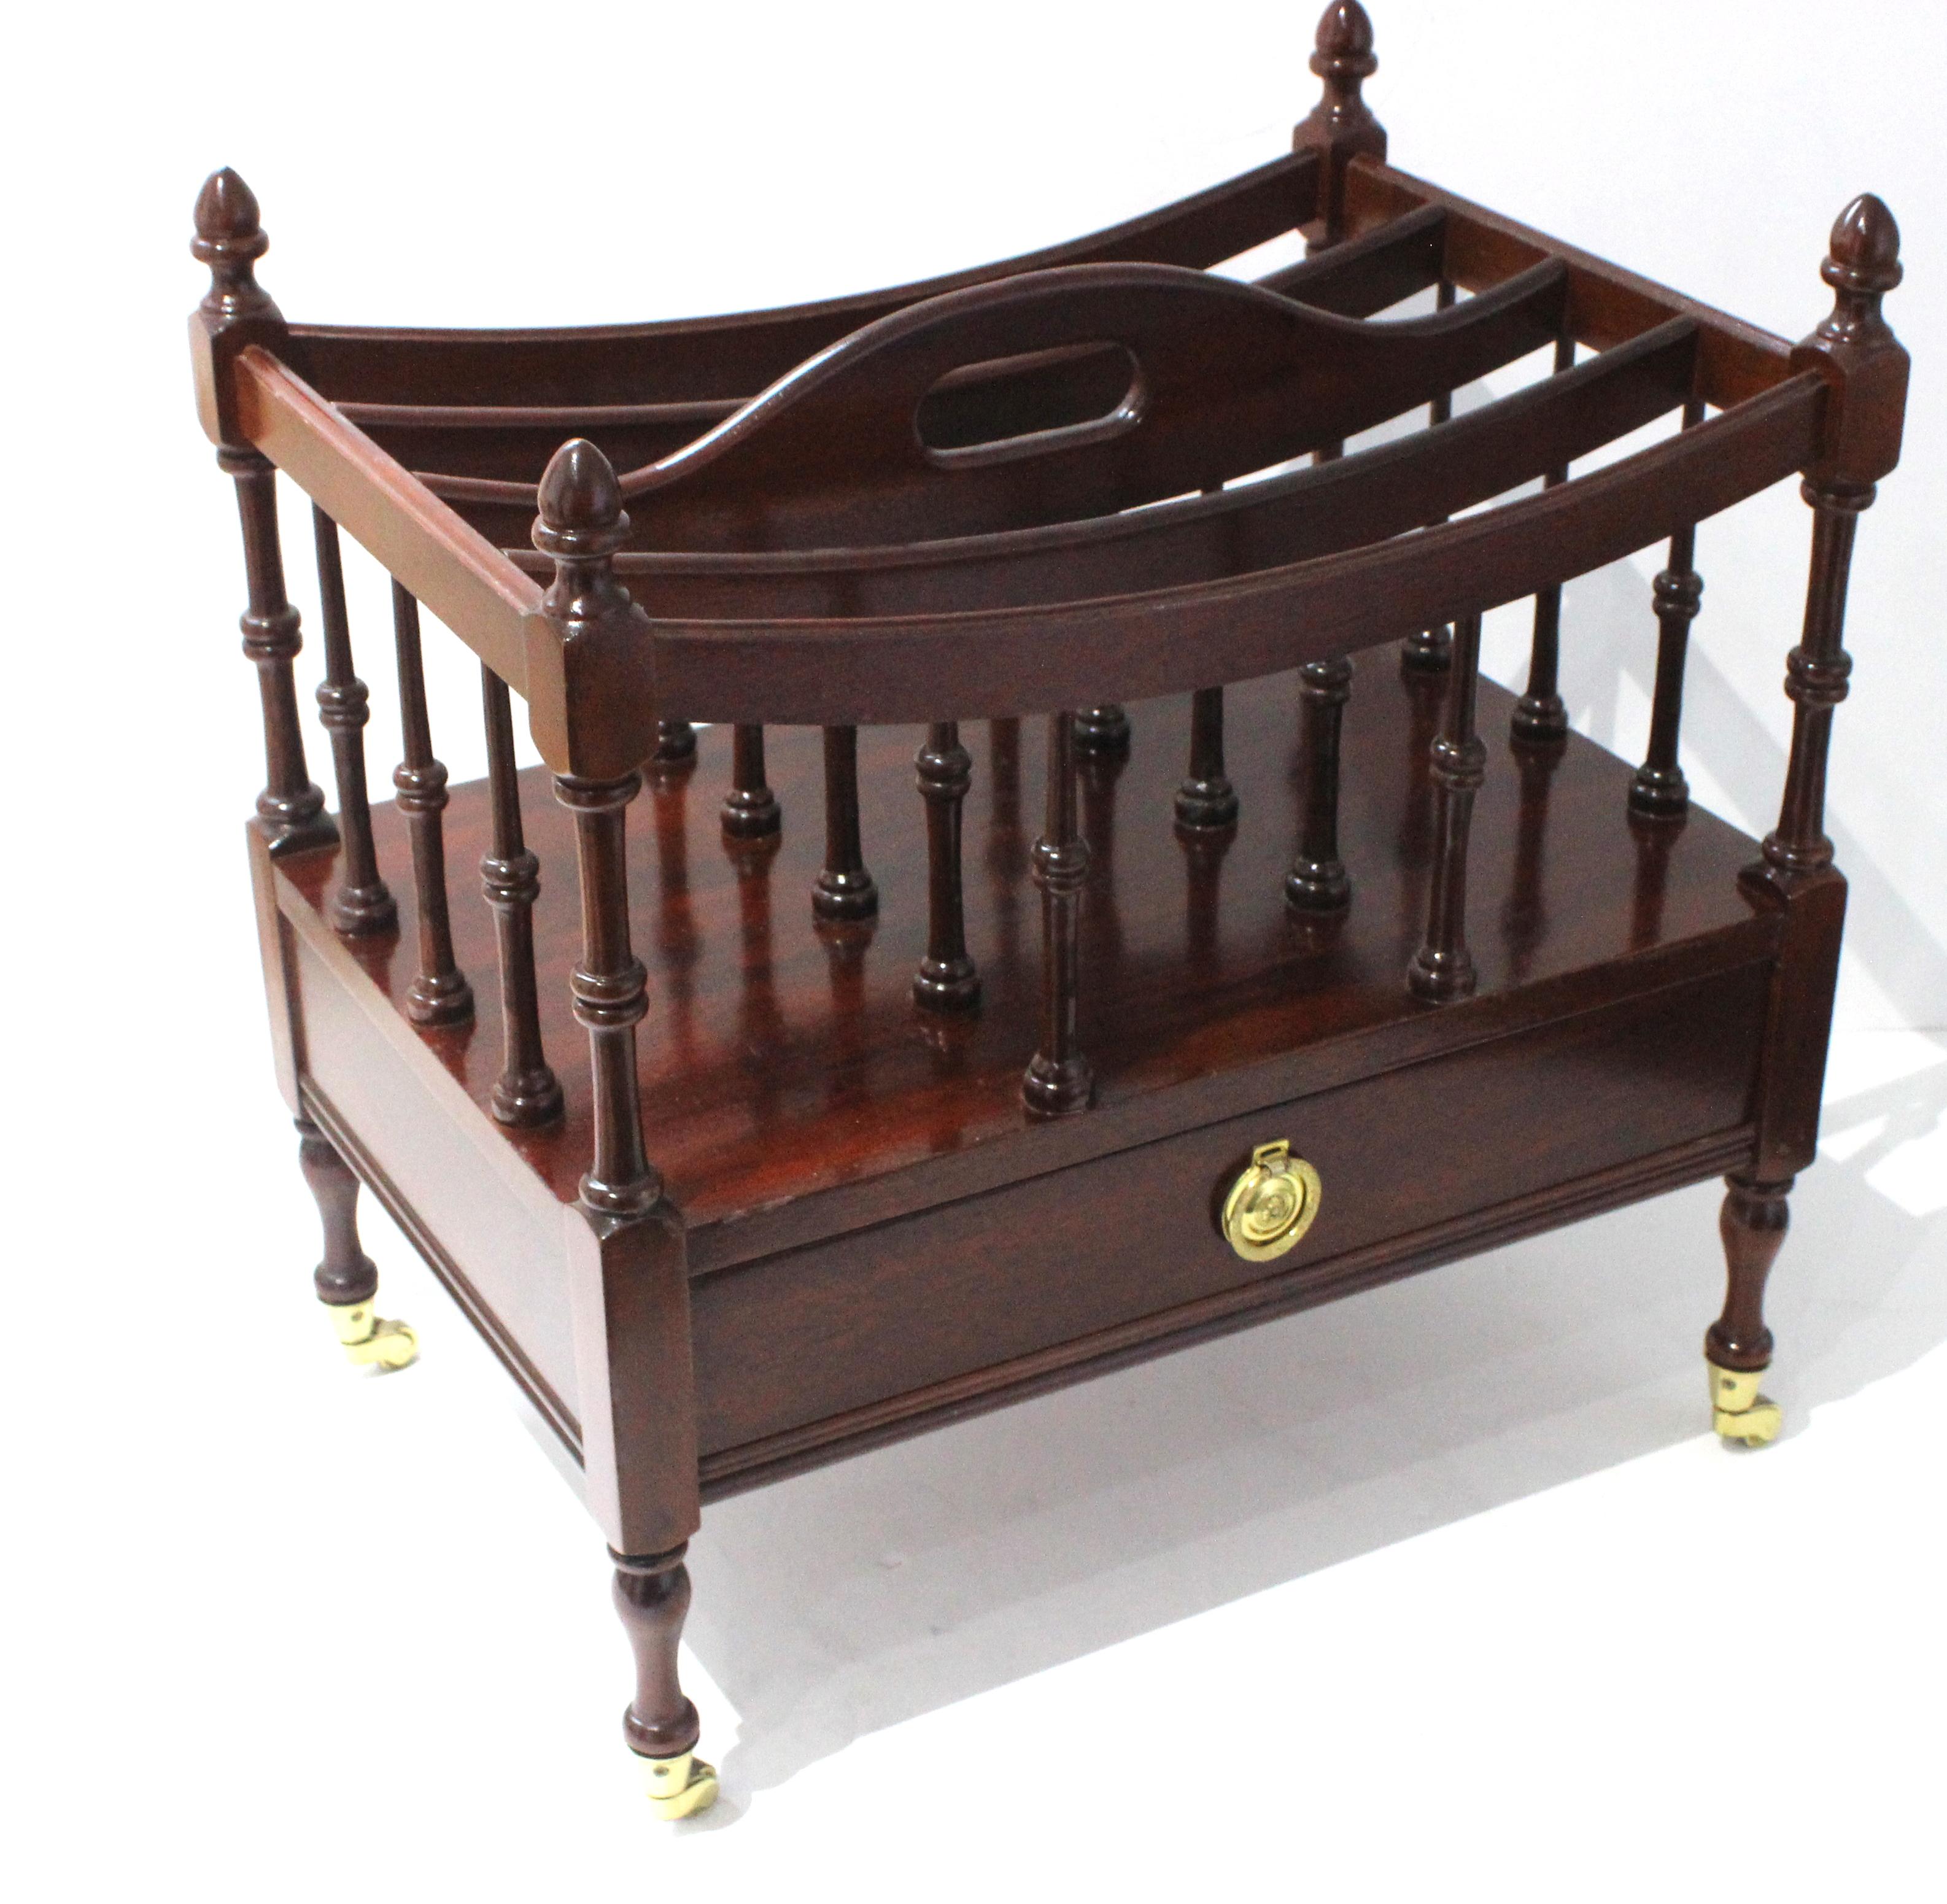 This stylish English Regency style cantebury is fabricated in mahogany with brass hardware.